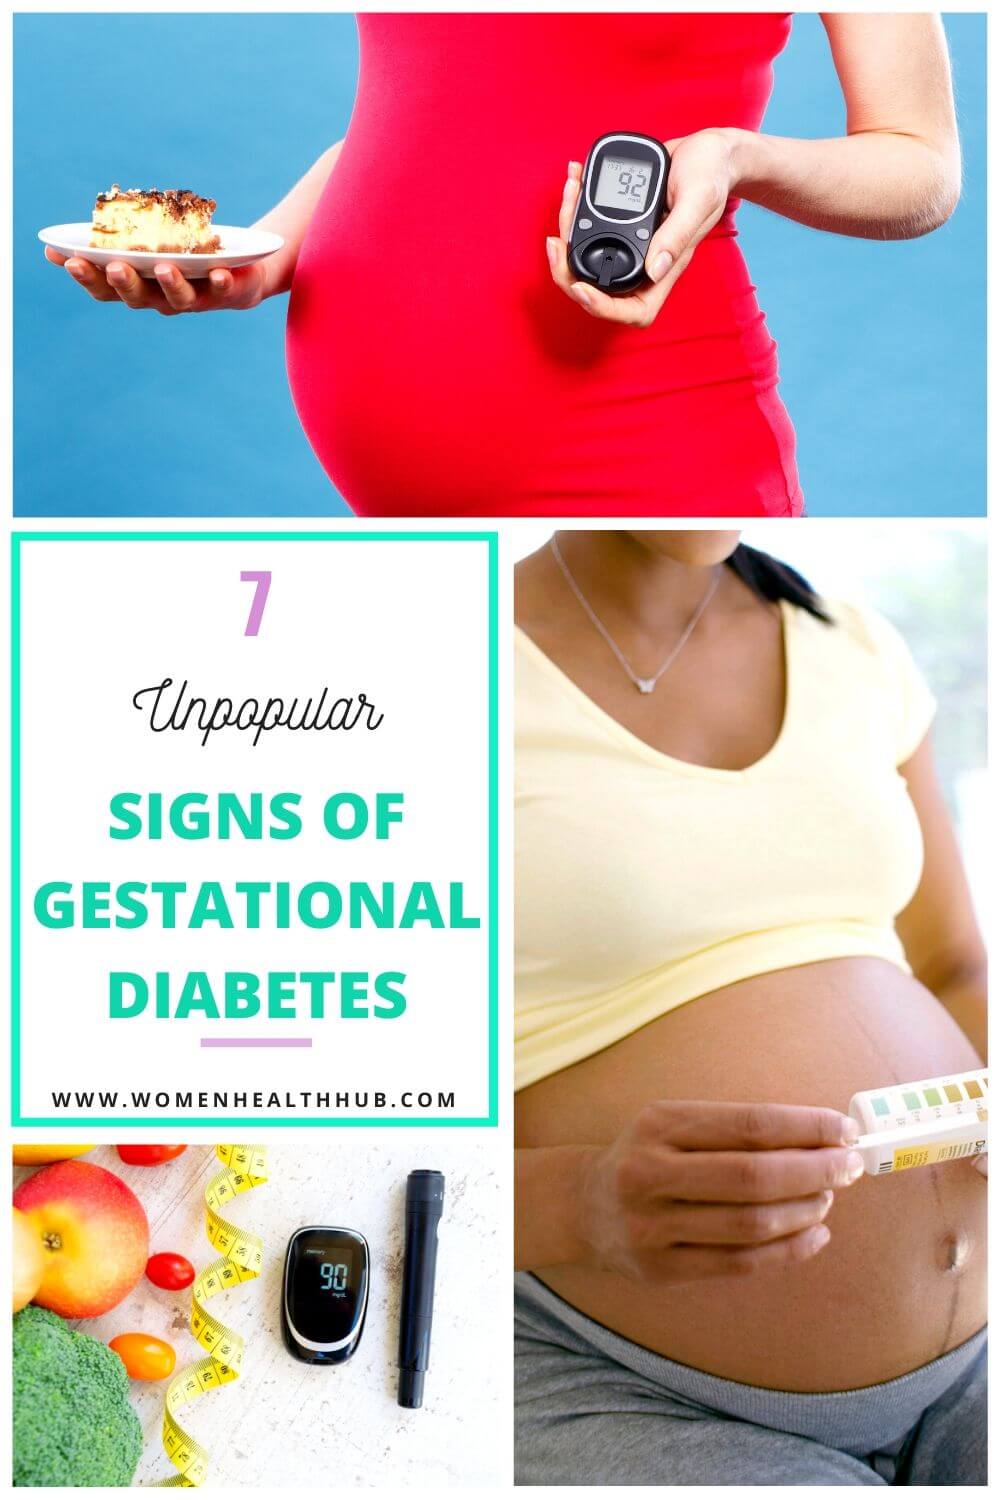 List of 7 Uncommon & Risky Signs of Gestational Diabetes